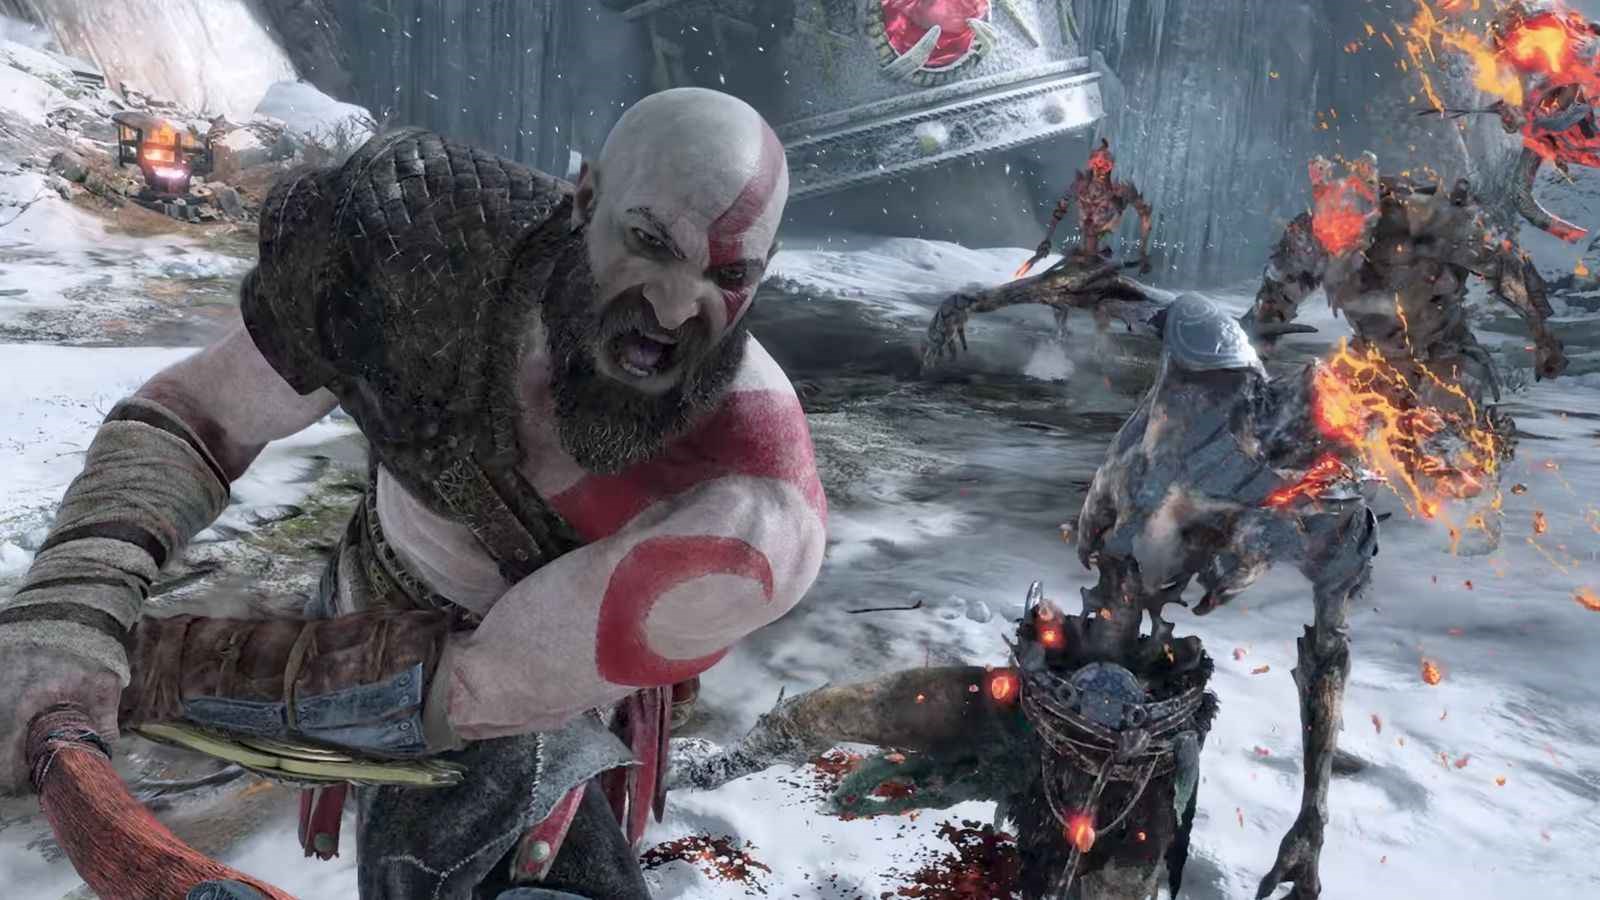 The Best Gaming PCs To Play God of War